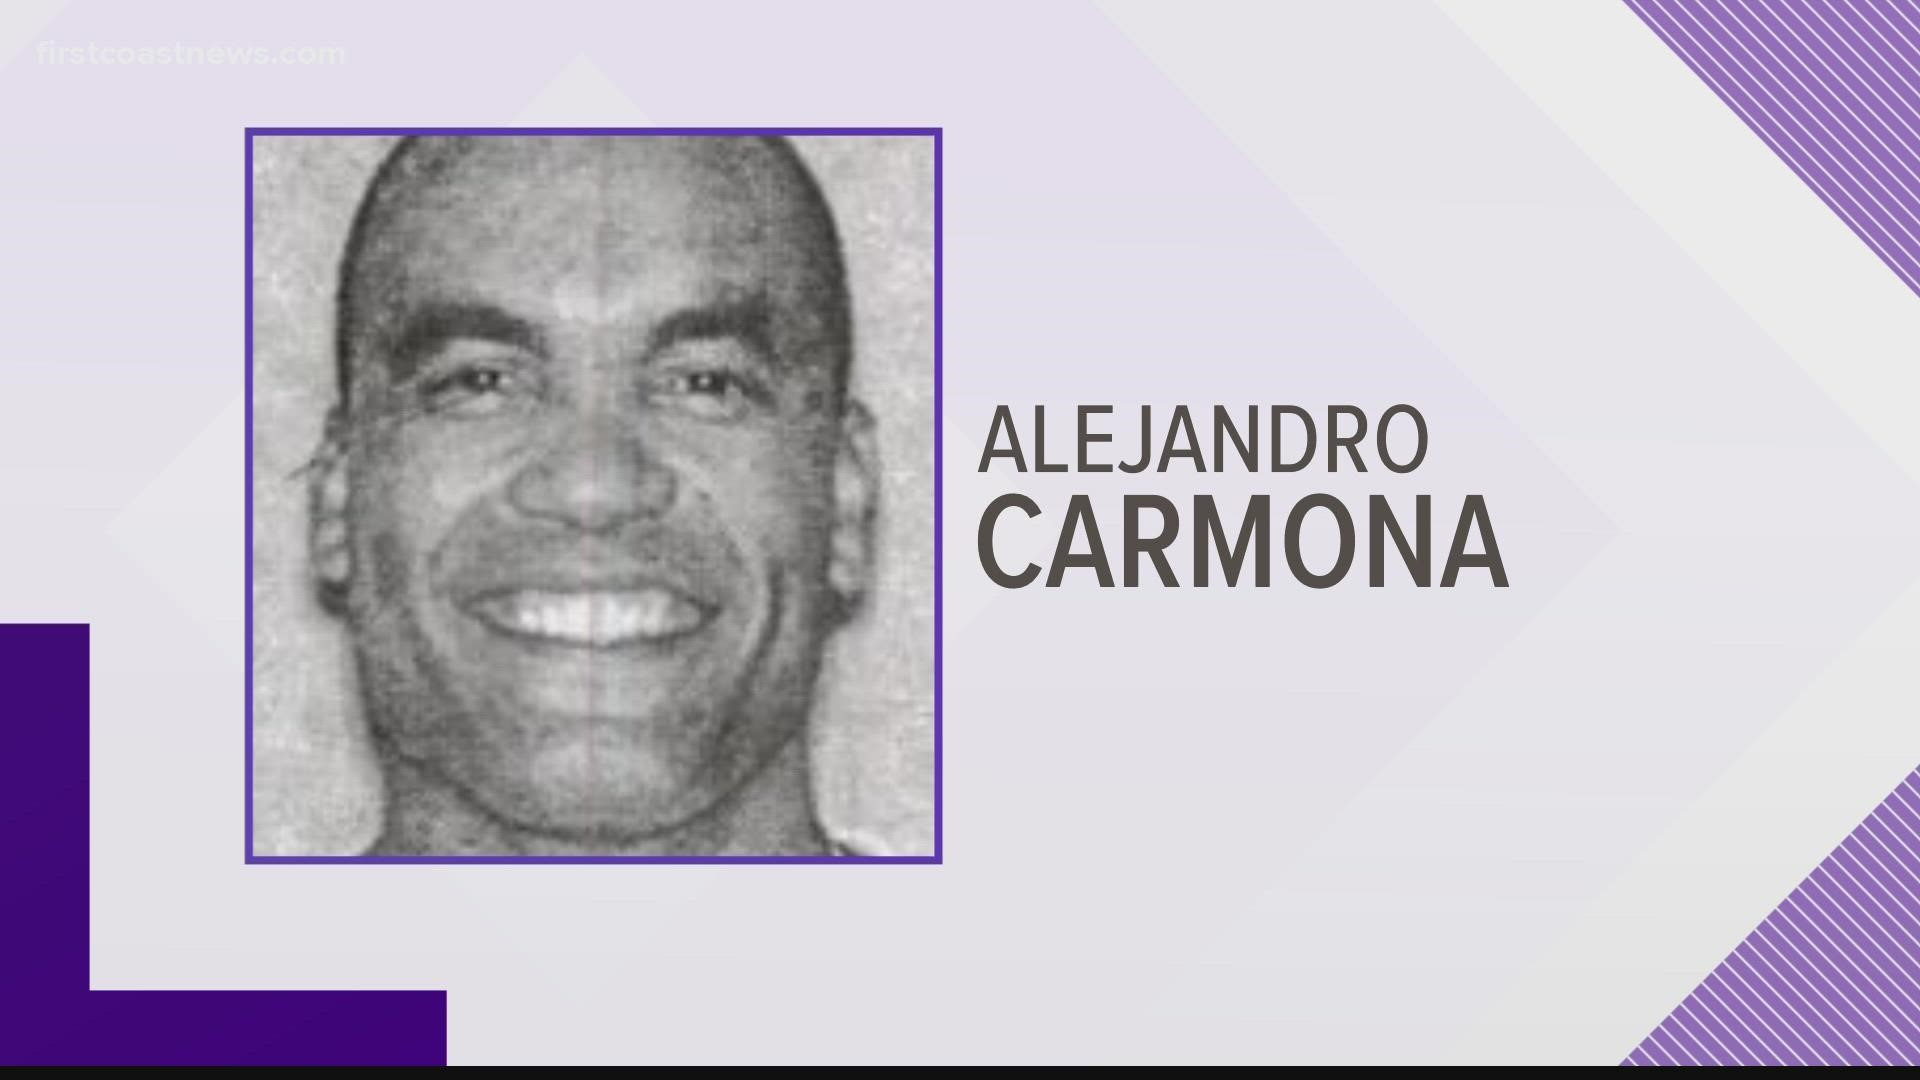 The affidavit describes naked videos that Officer Carmona sent the victim. The boy said he responded, "dude WTF."